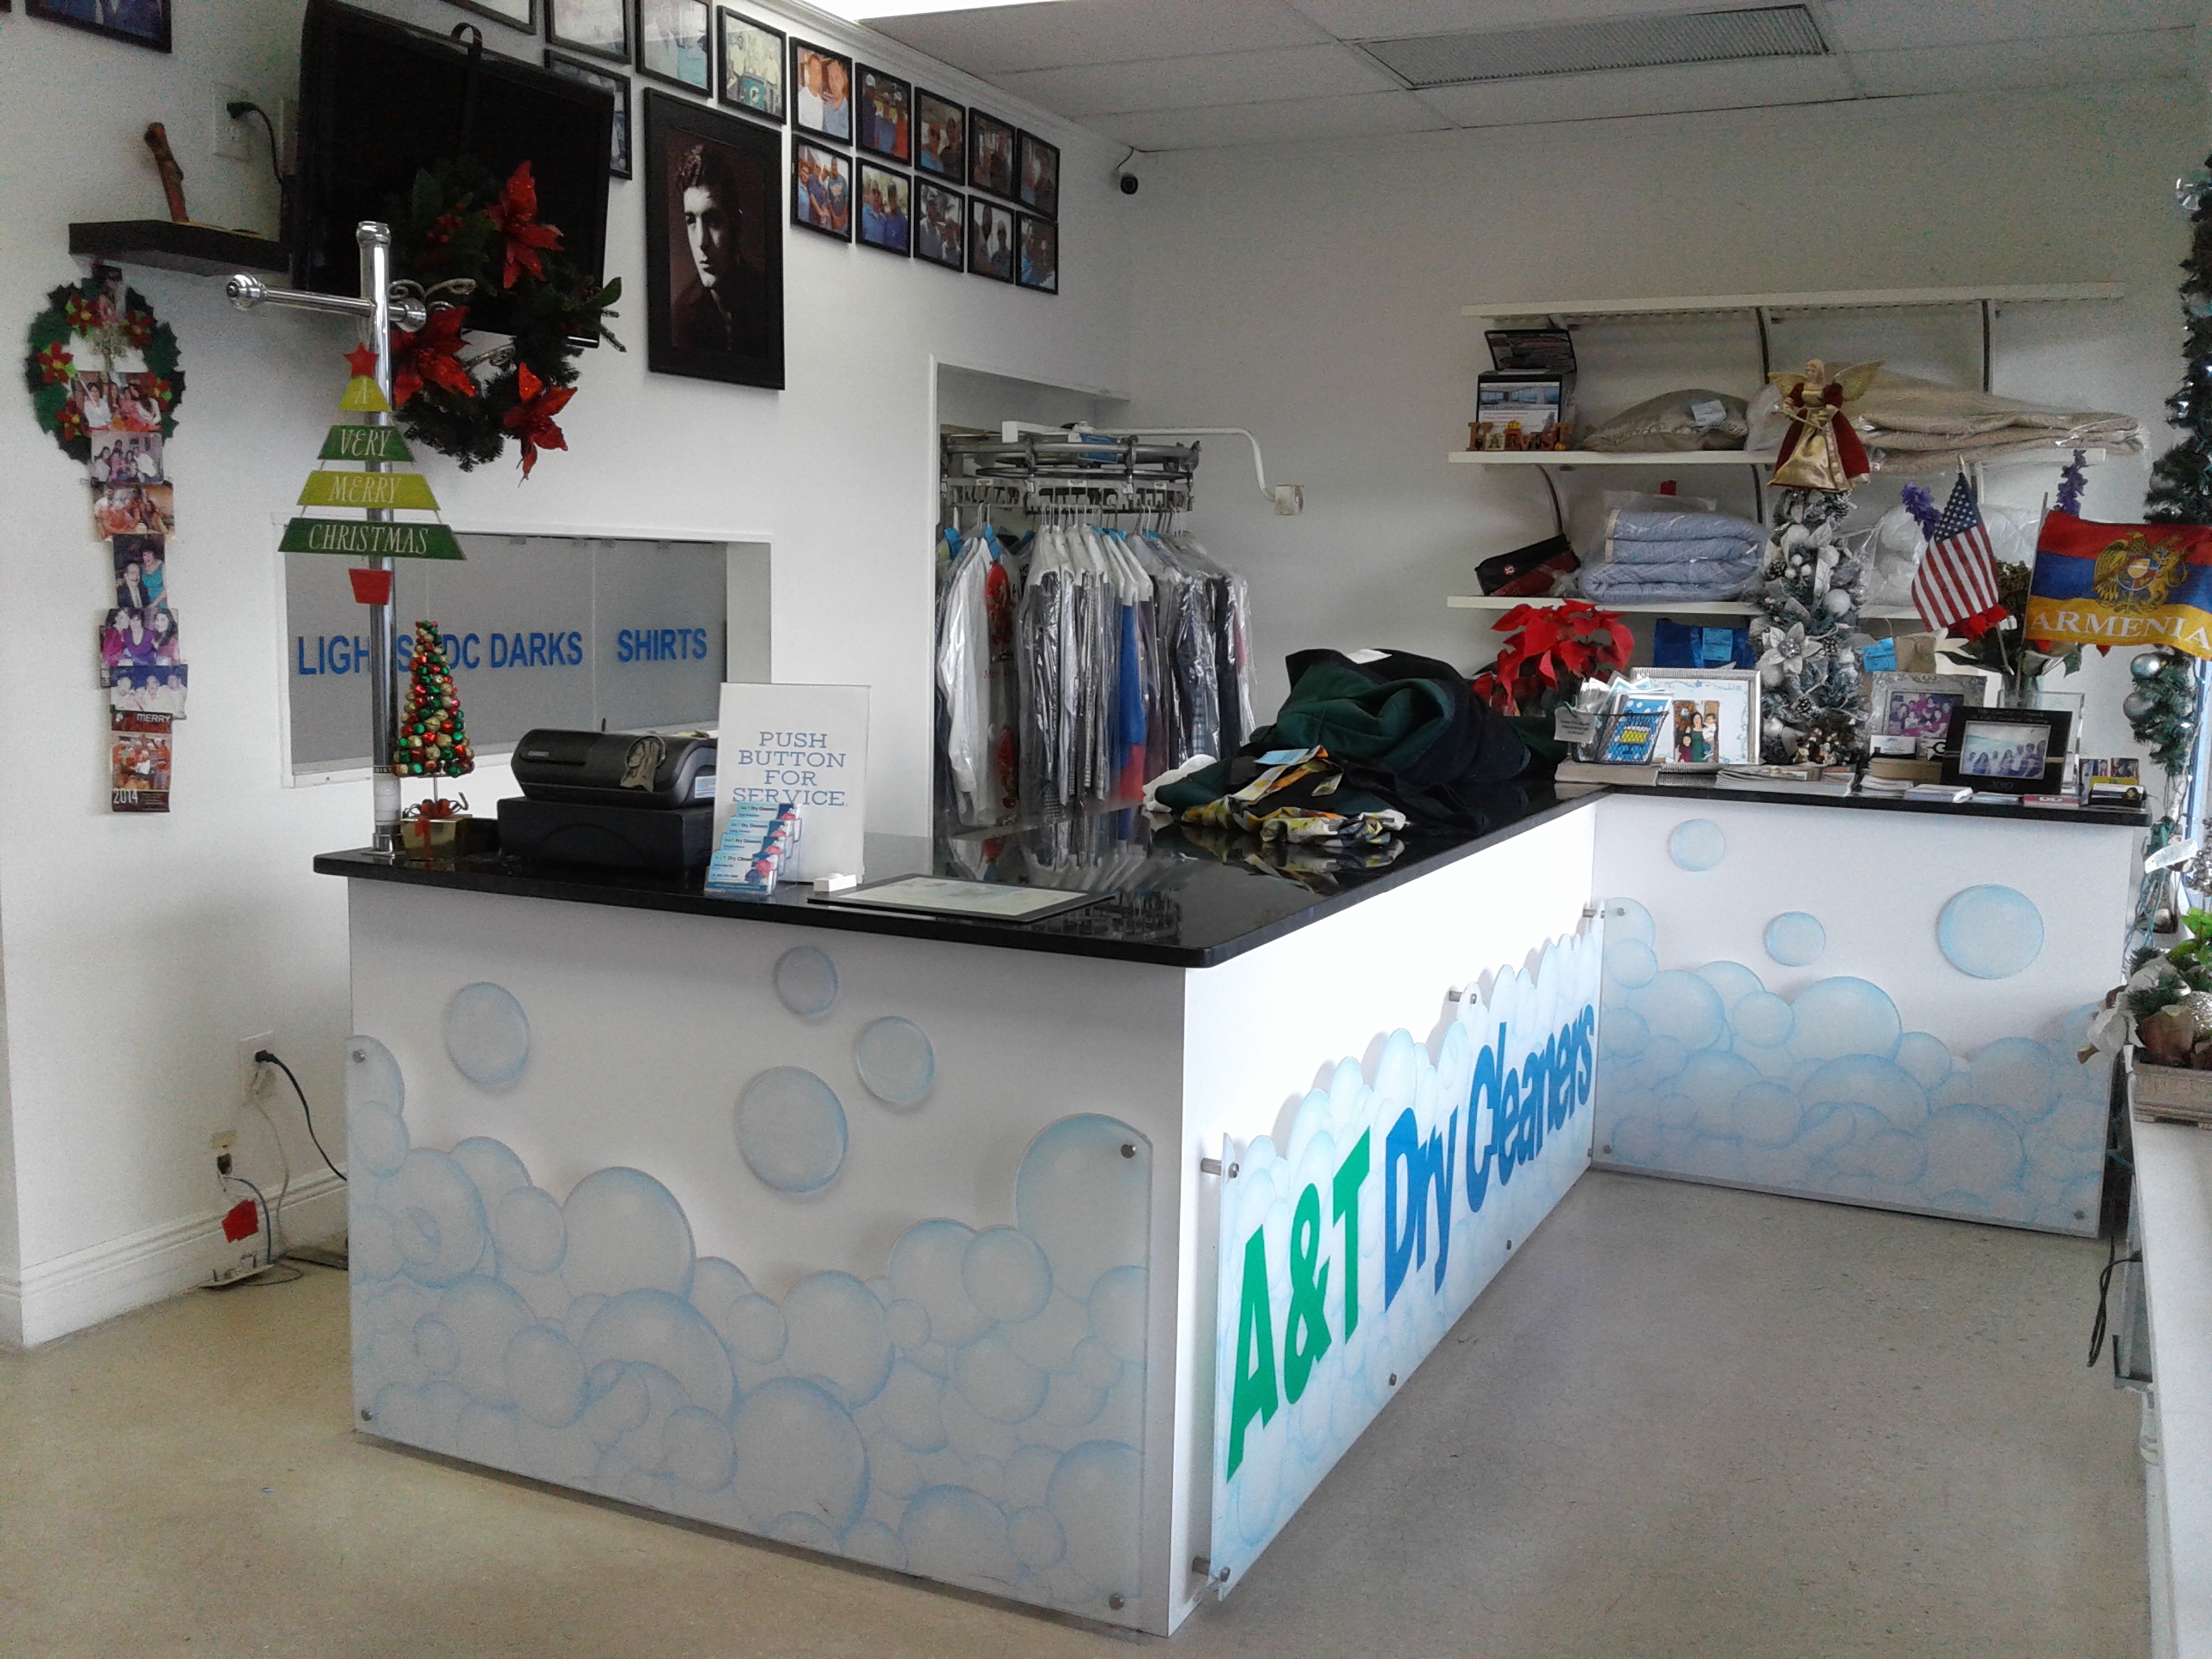 A&T Dry Cleaners Photo